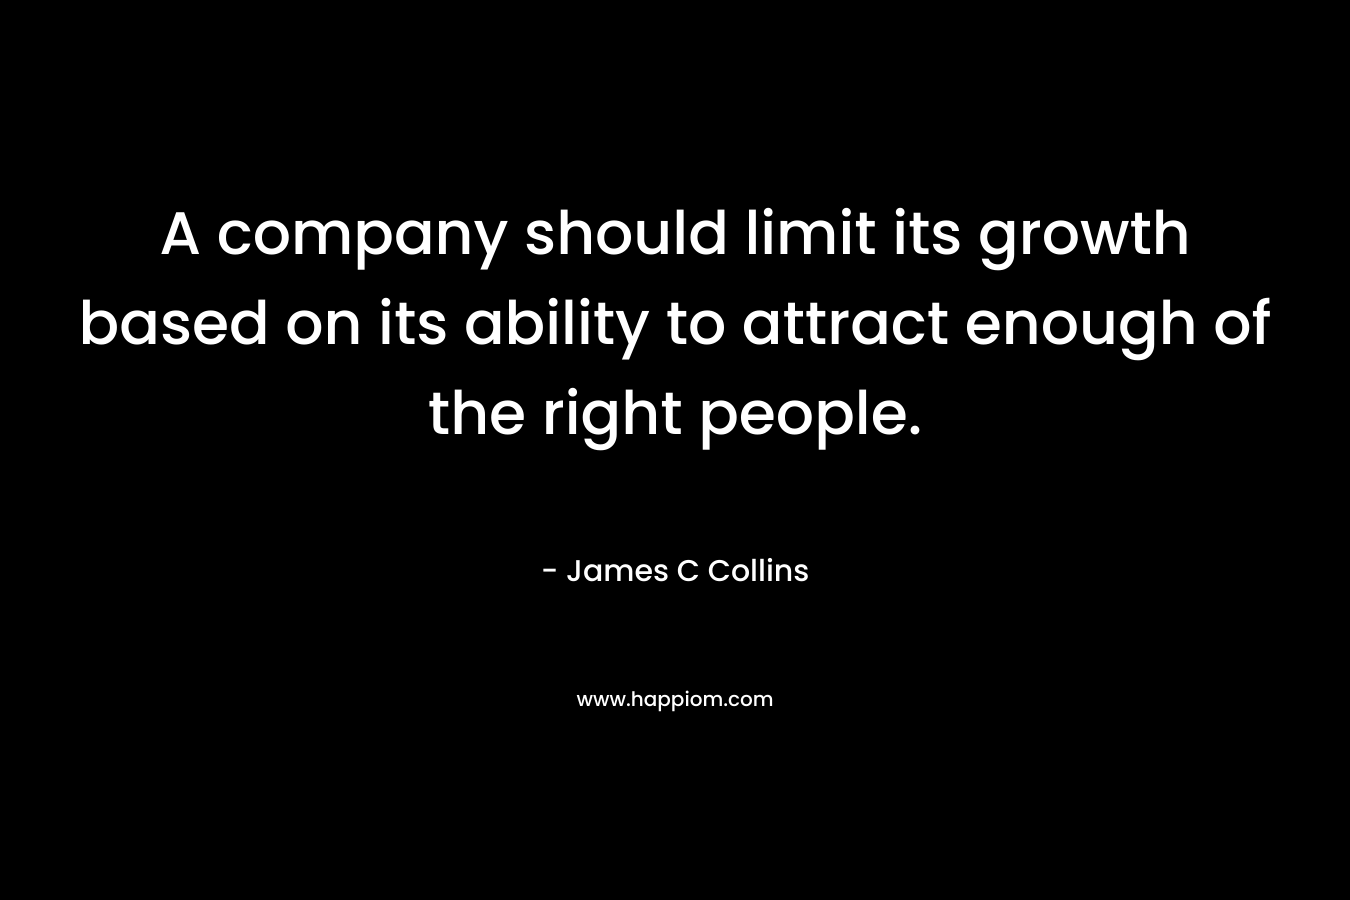 A company should limit its growth based on its ability to attract enough of the right people.